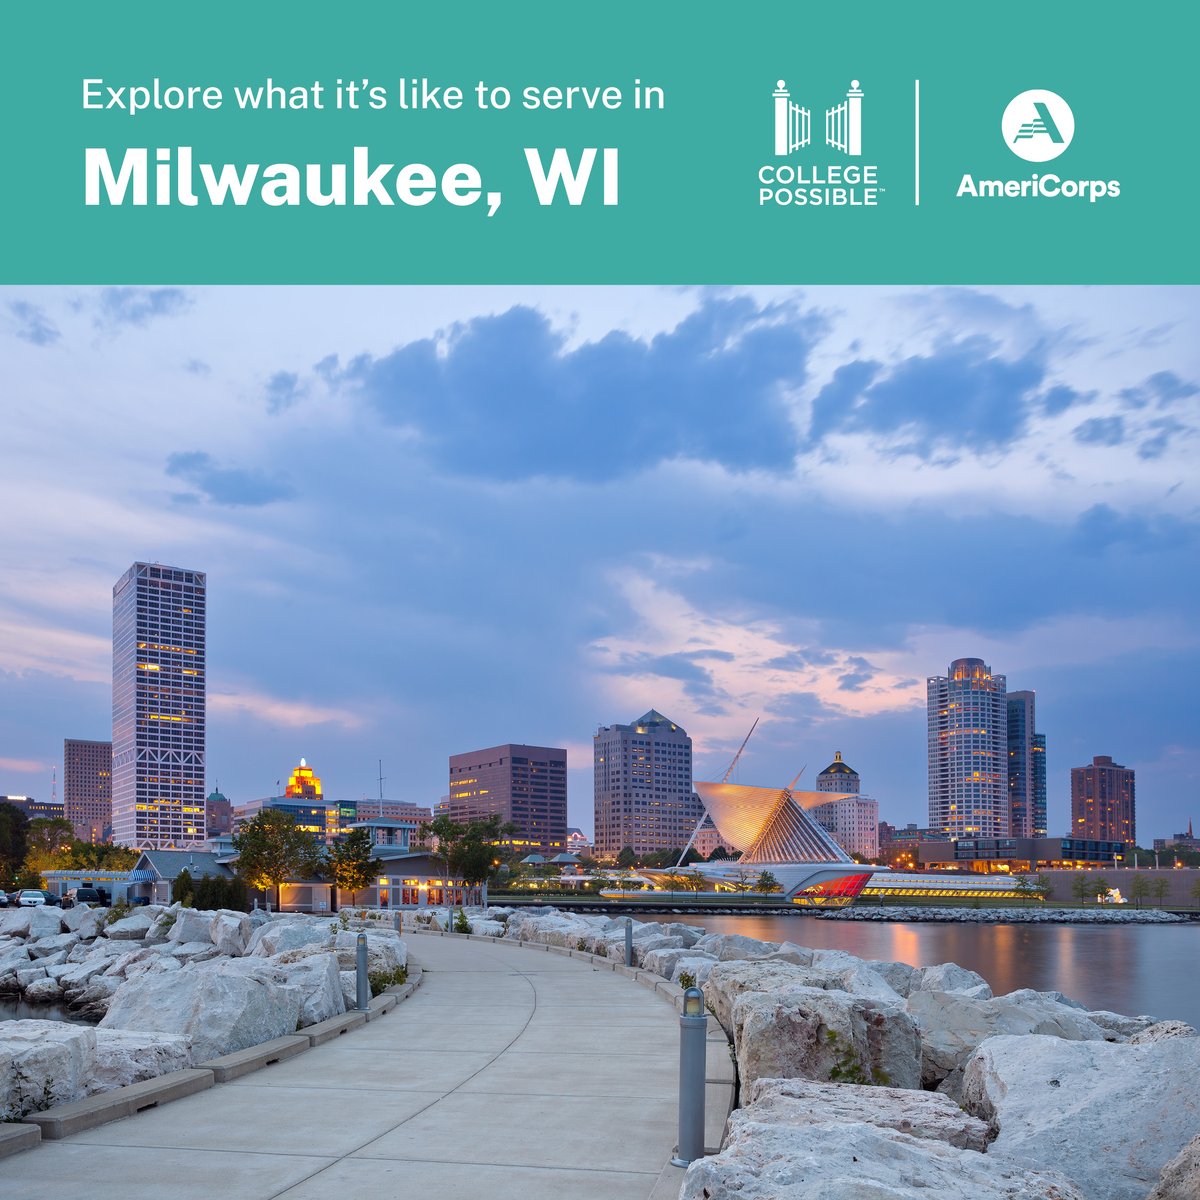 Whether you enjoy city life or a beach day, @CollPossibleMKE is the perfect place for you to serve as an @AmeriCorps coach! We’re covering where coaches live, how they get to work, and where they spend their free time in this Milwaukee site profile: bit.ly/3VqC9wD